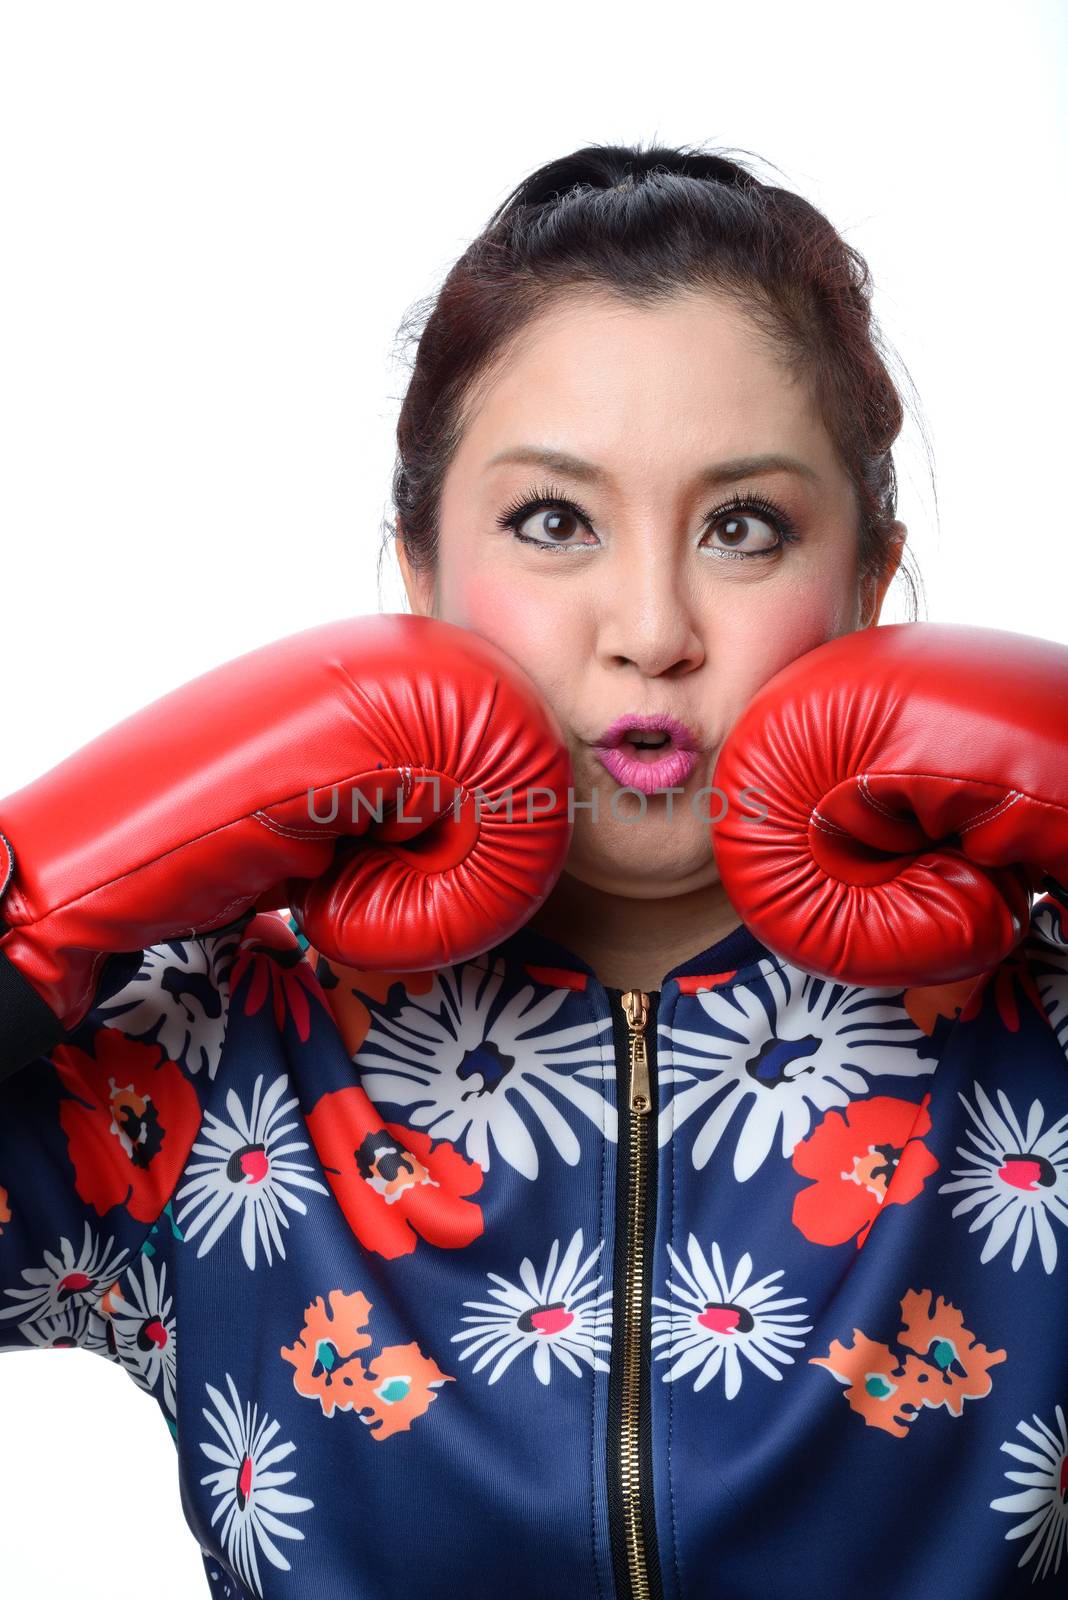 squint eyed crazy woman in boxing gloves  by numskyman